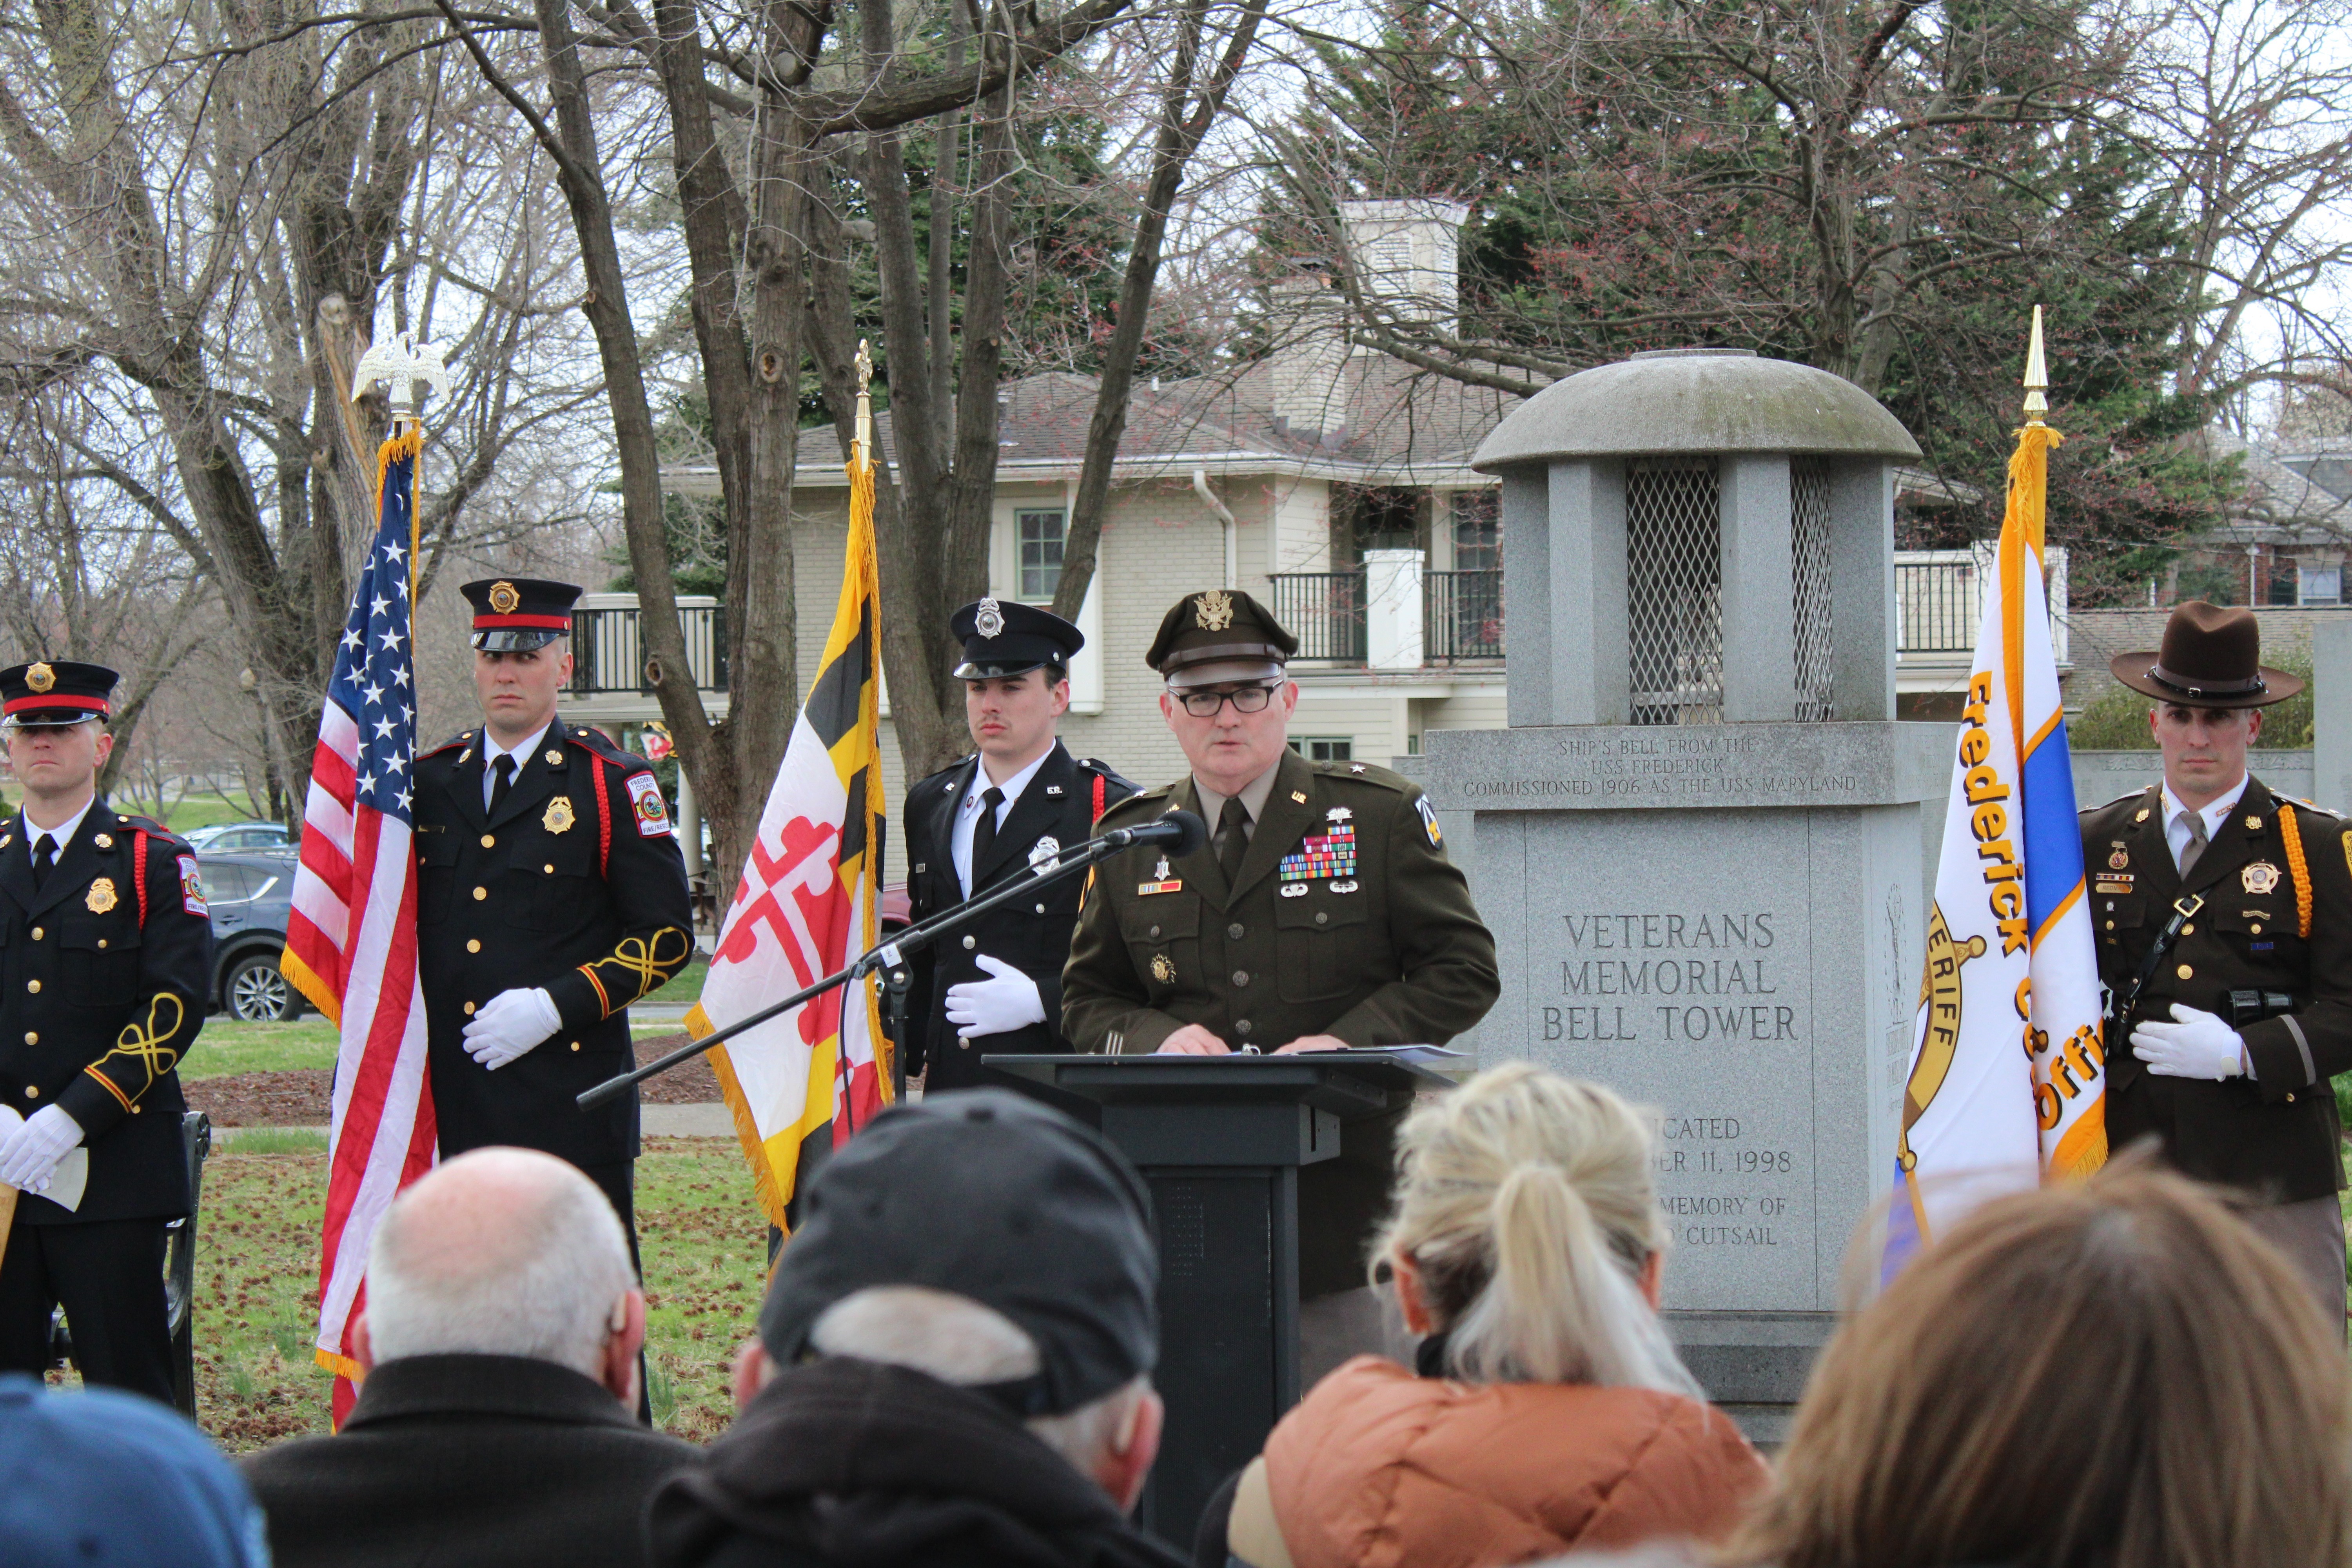 Usamrdc Joins Frederick To Honor Vietnam Veterans Mark Years Of Remembrance Article The United States Army